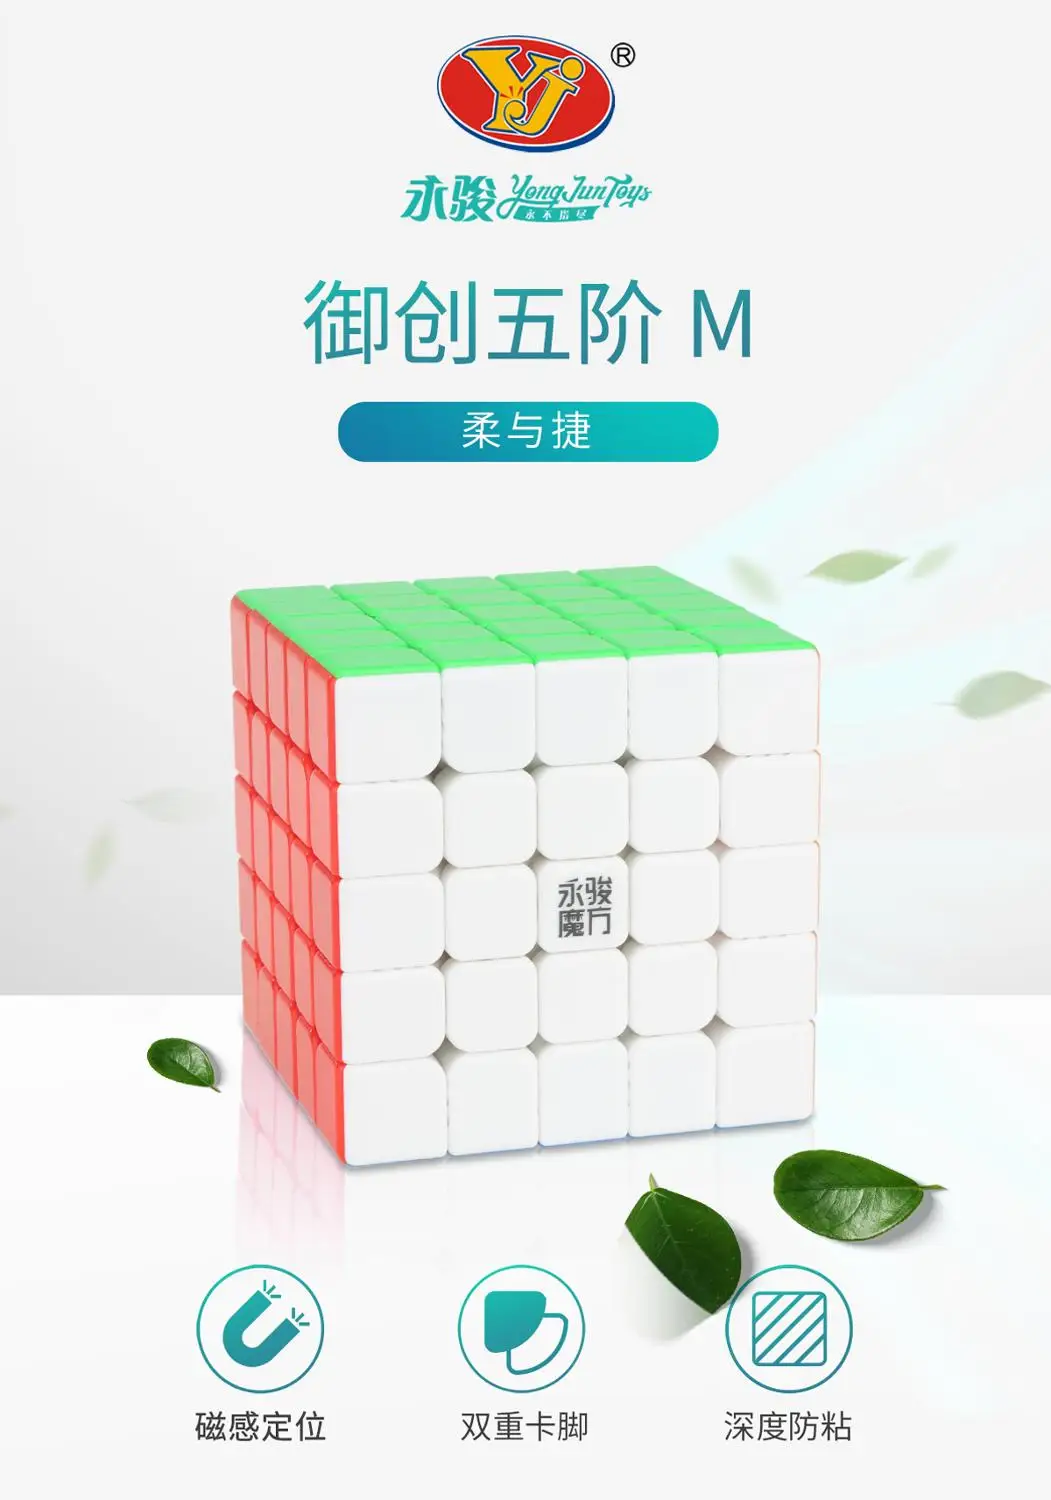 Details about   CuberSpeed YJ Yuchuang 2M 5x5 stickerless Magic Cube YJ Yuchuang V2 M Speed Cube 